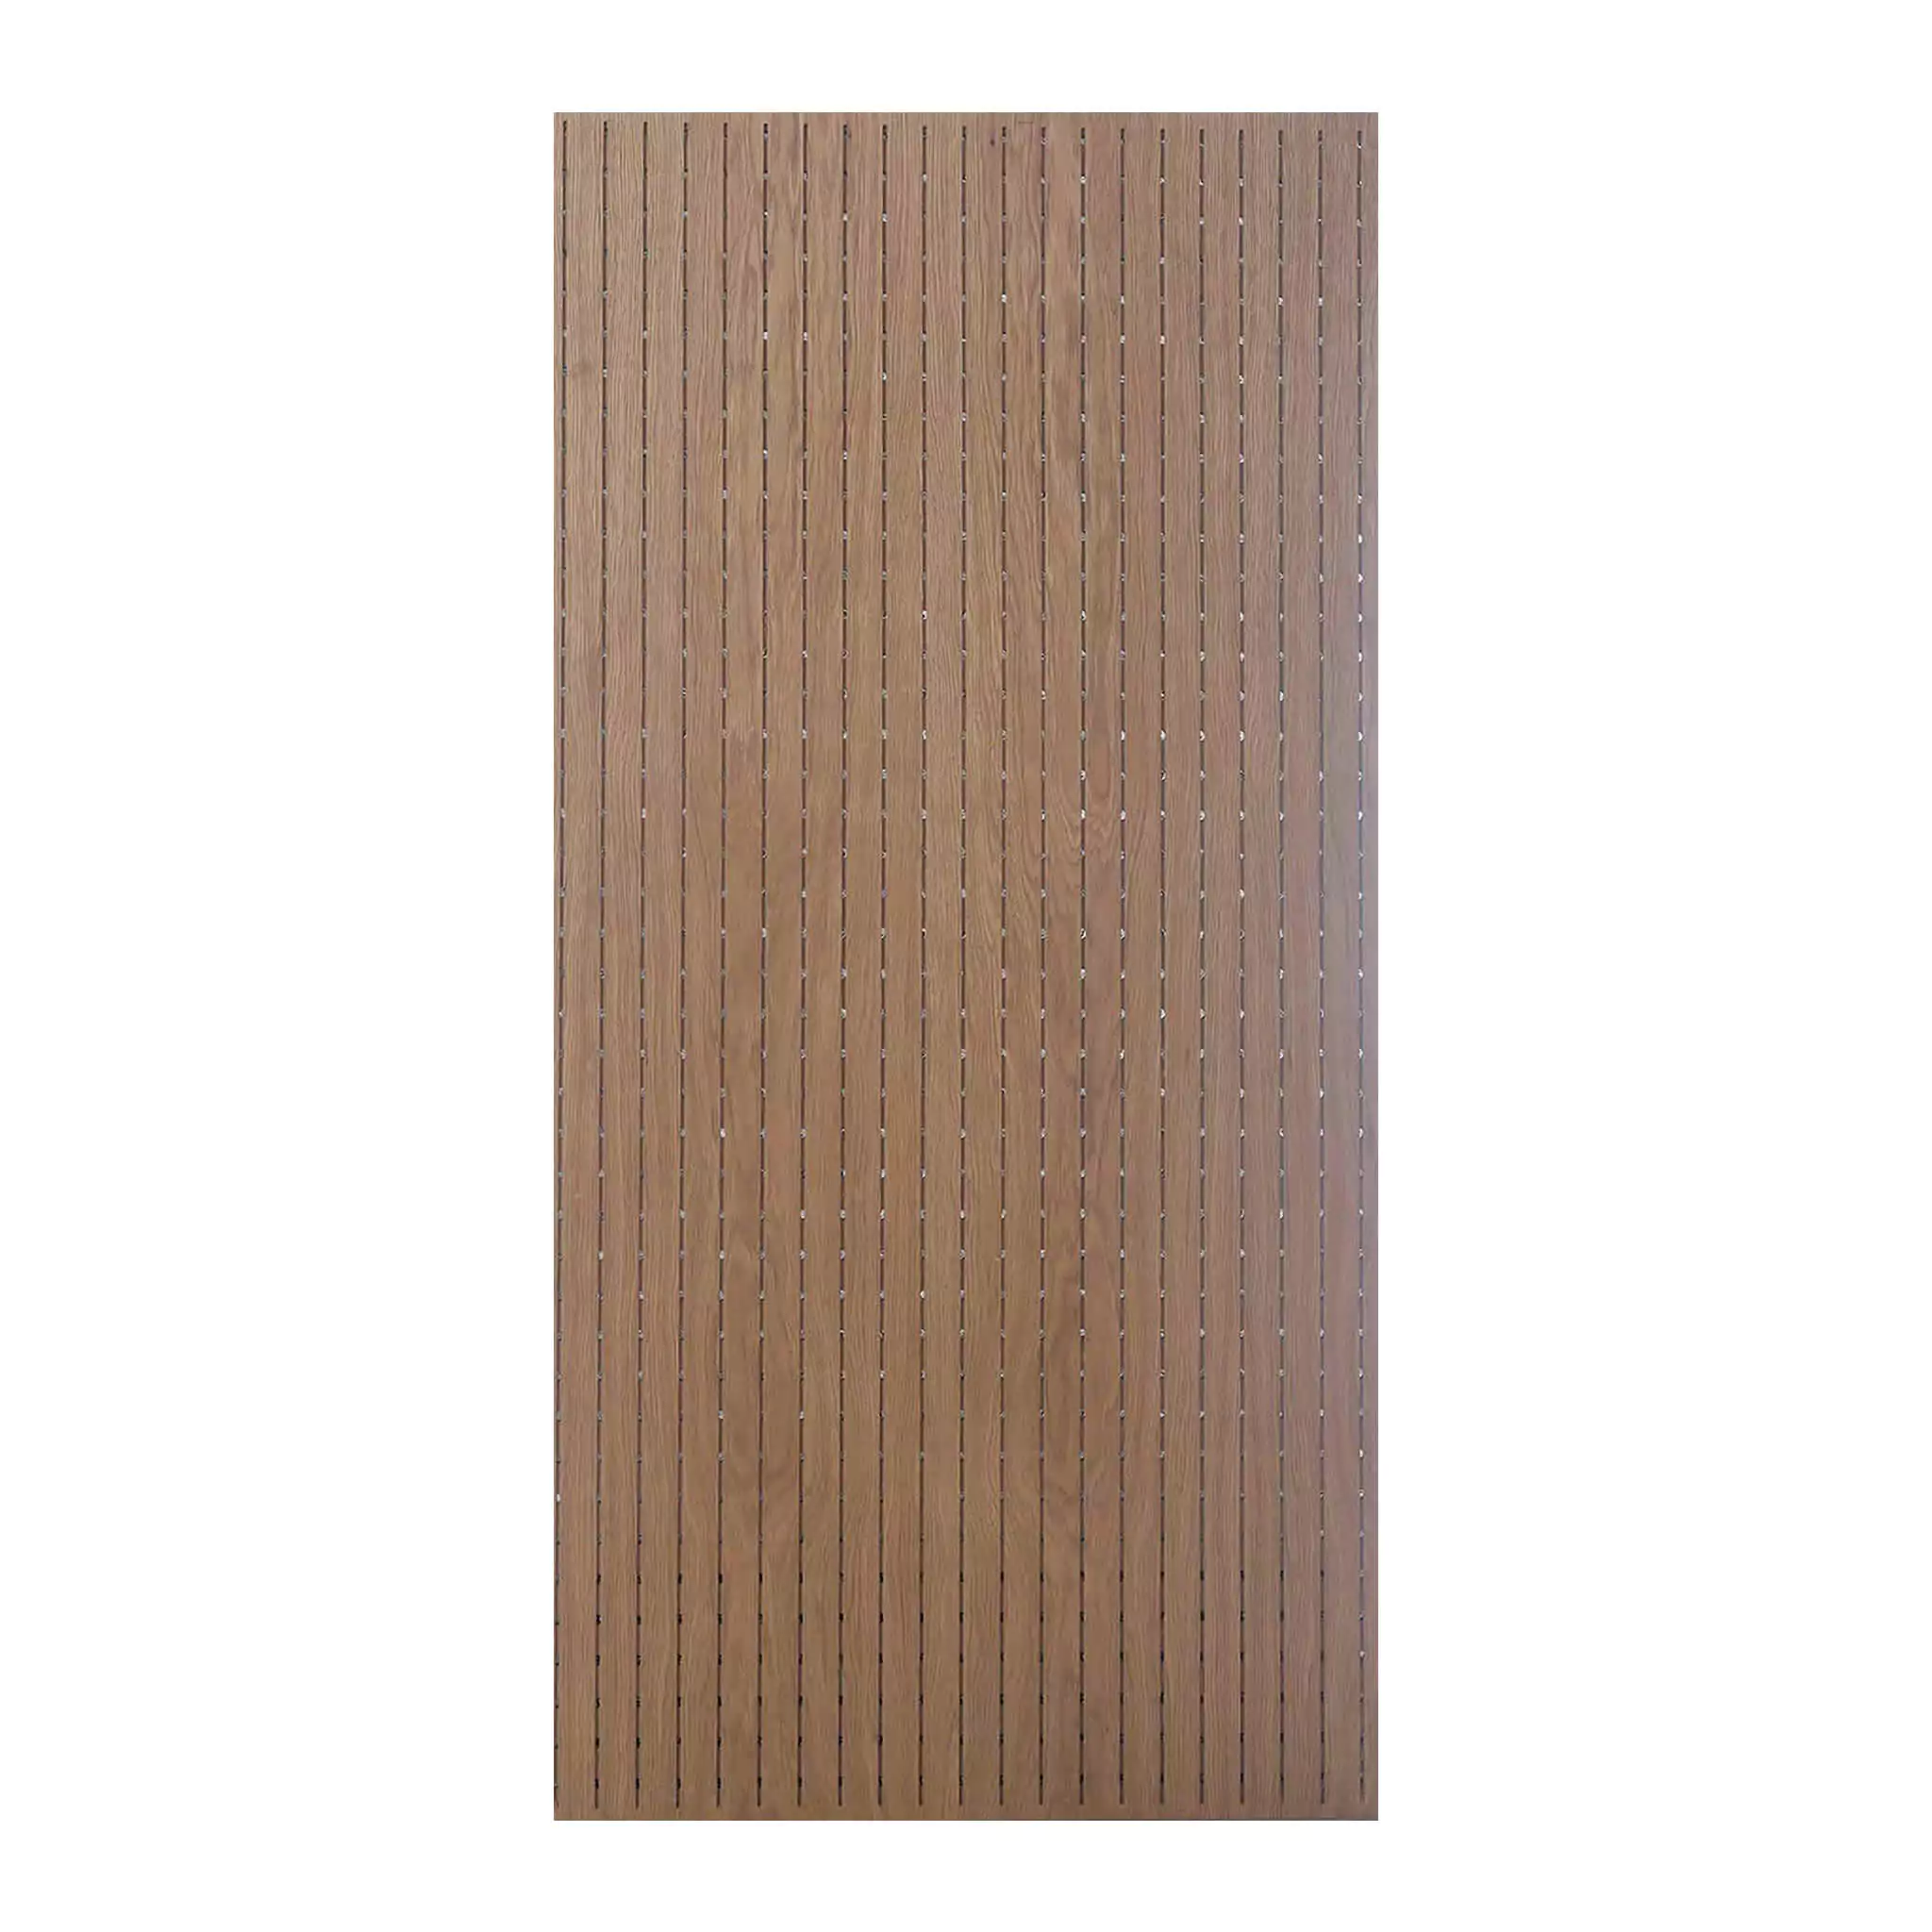 Simko Seating Product Monacoustic Panel Wooden 2